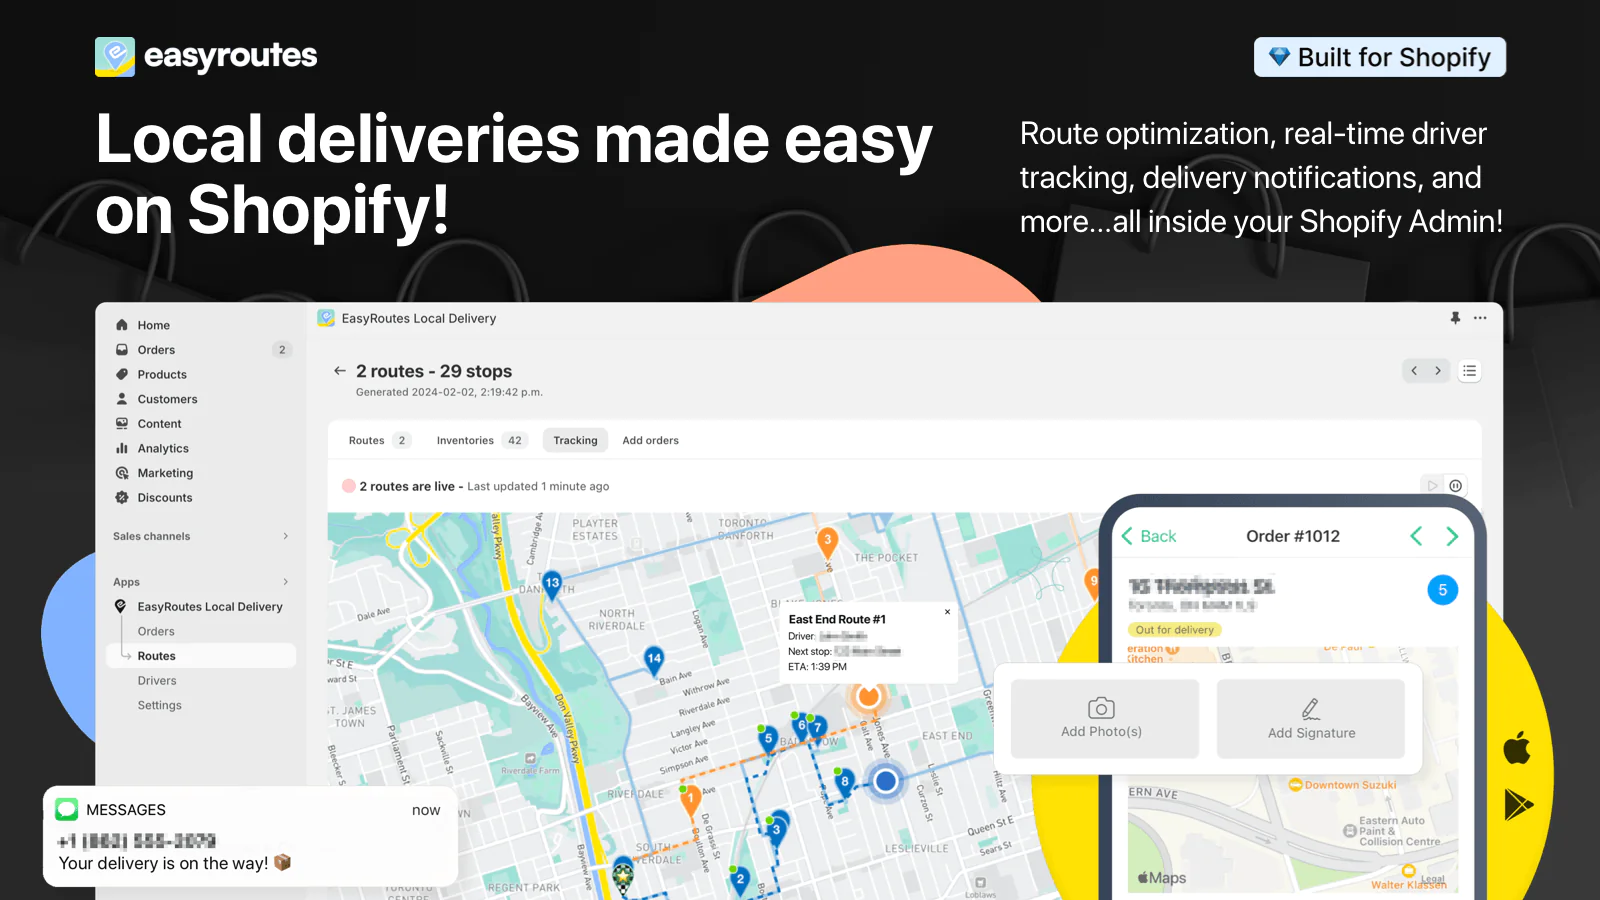 Route optimization, real-time driver tracking, delivery notifications, and more...all inside your Shopify Admin!